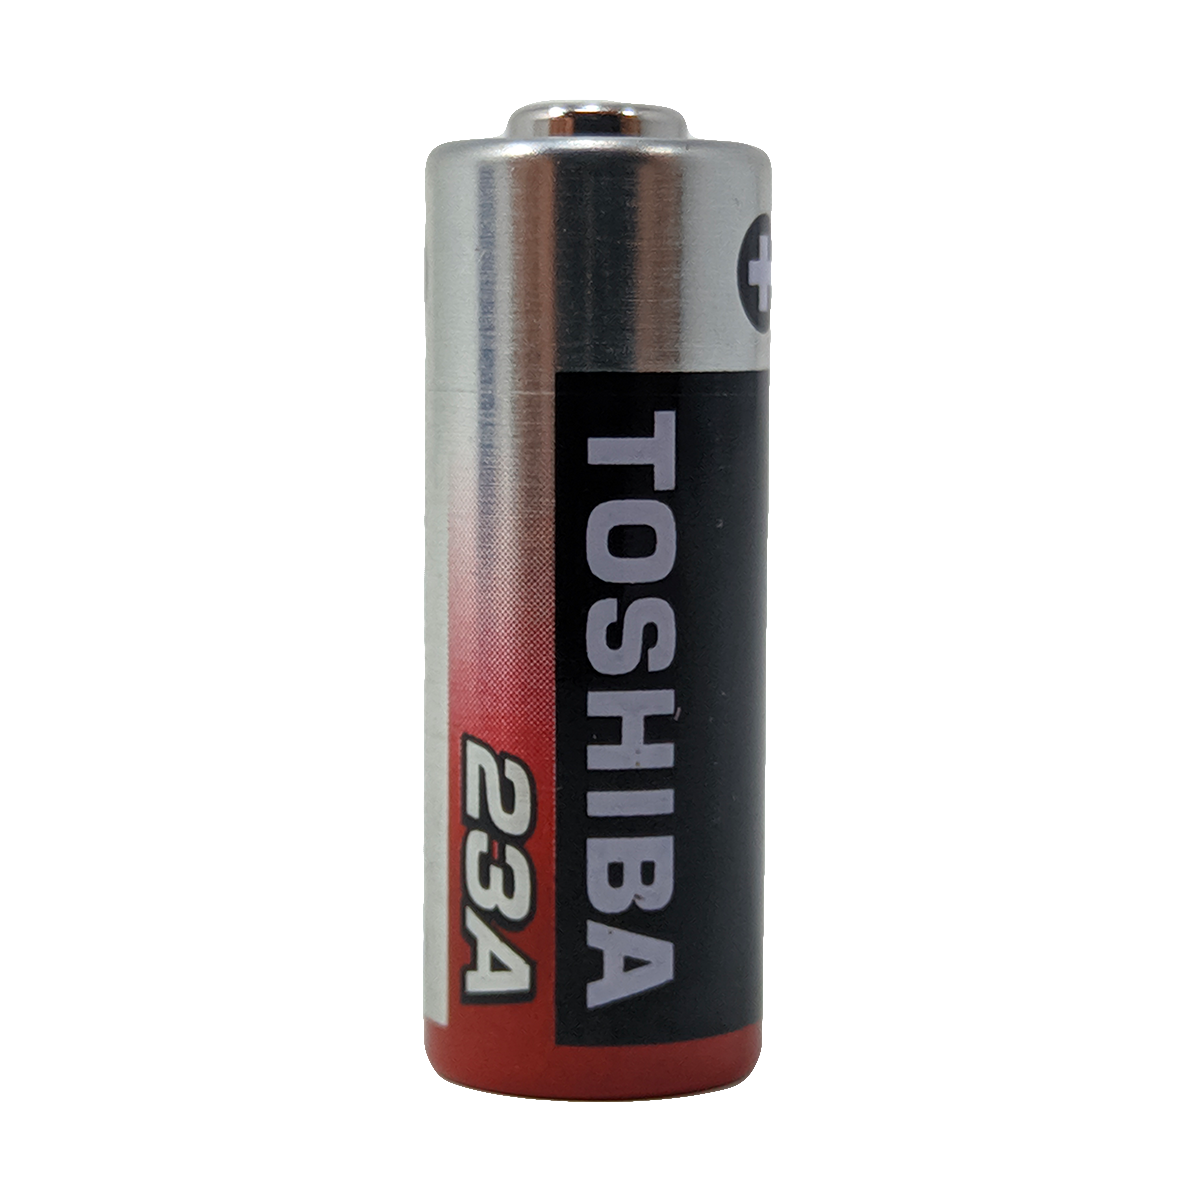 AAA Battery  Size, Weight & Applications